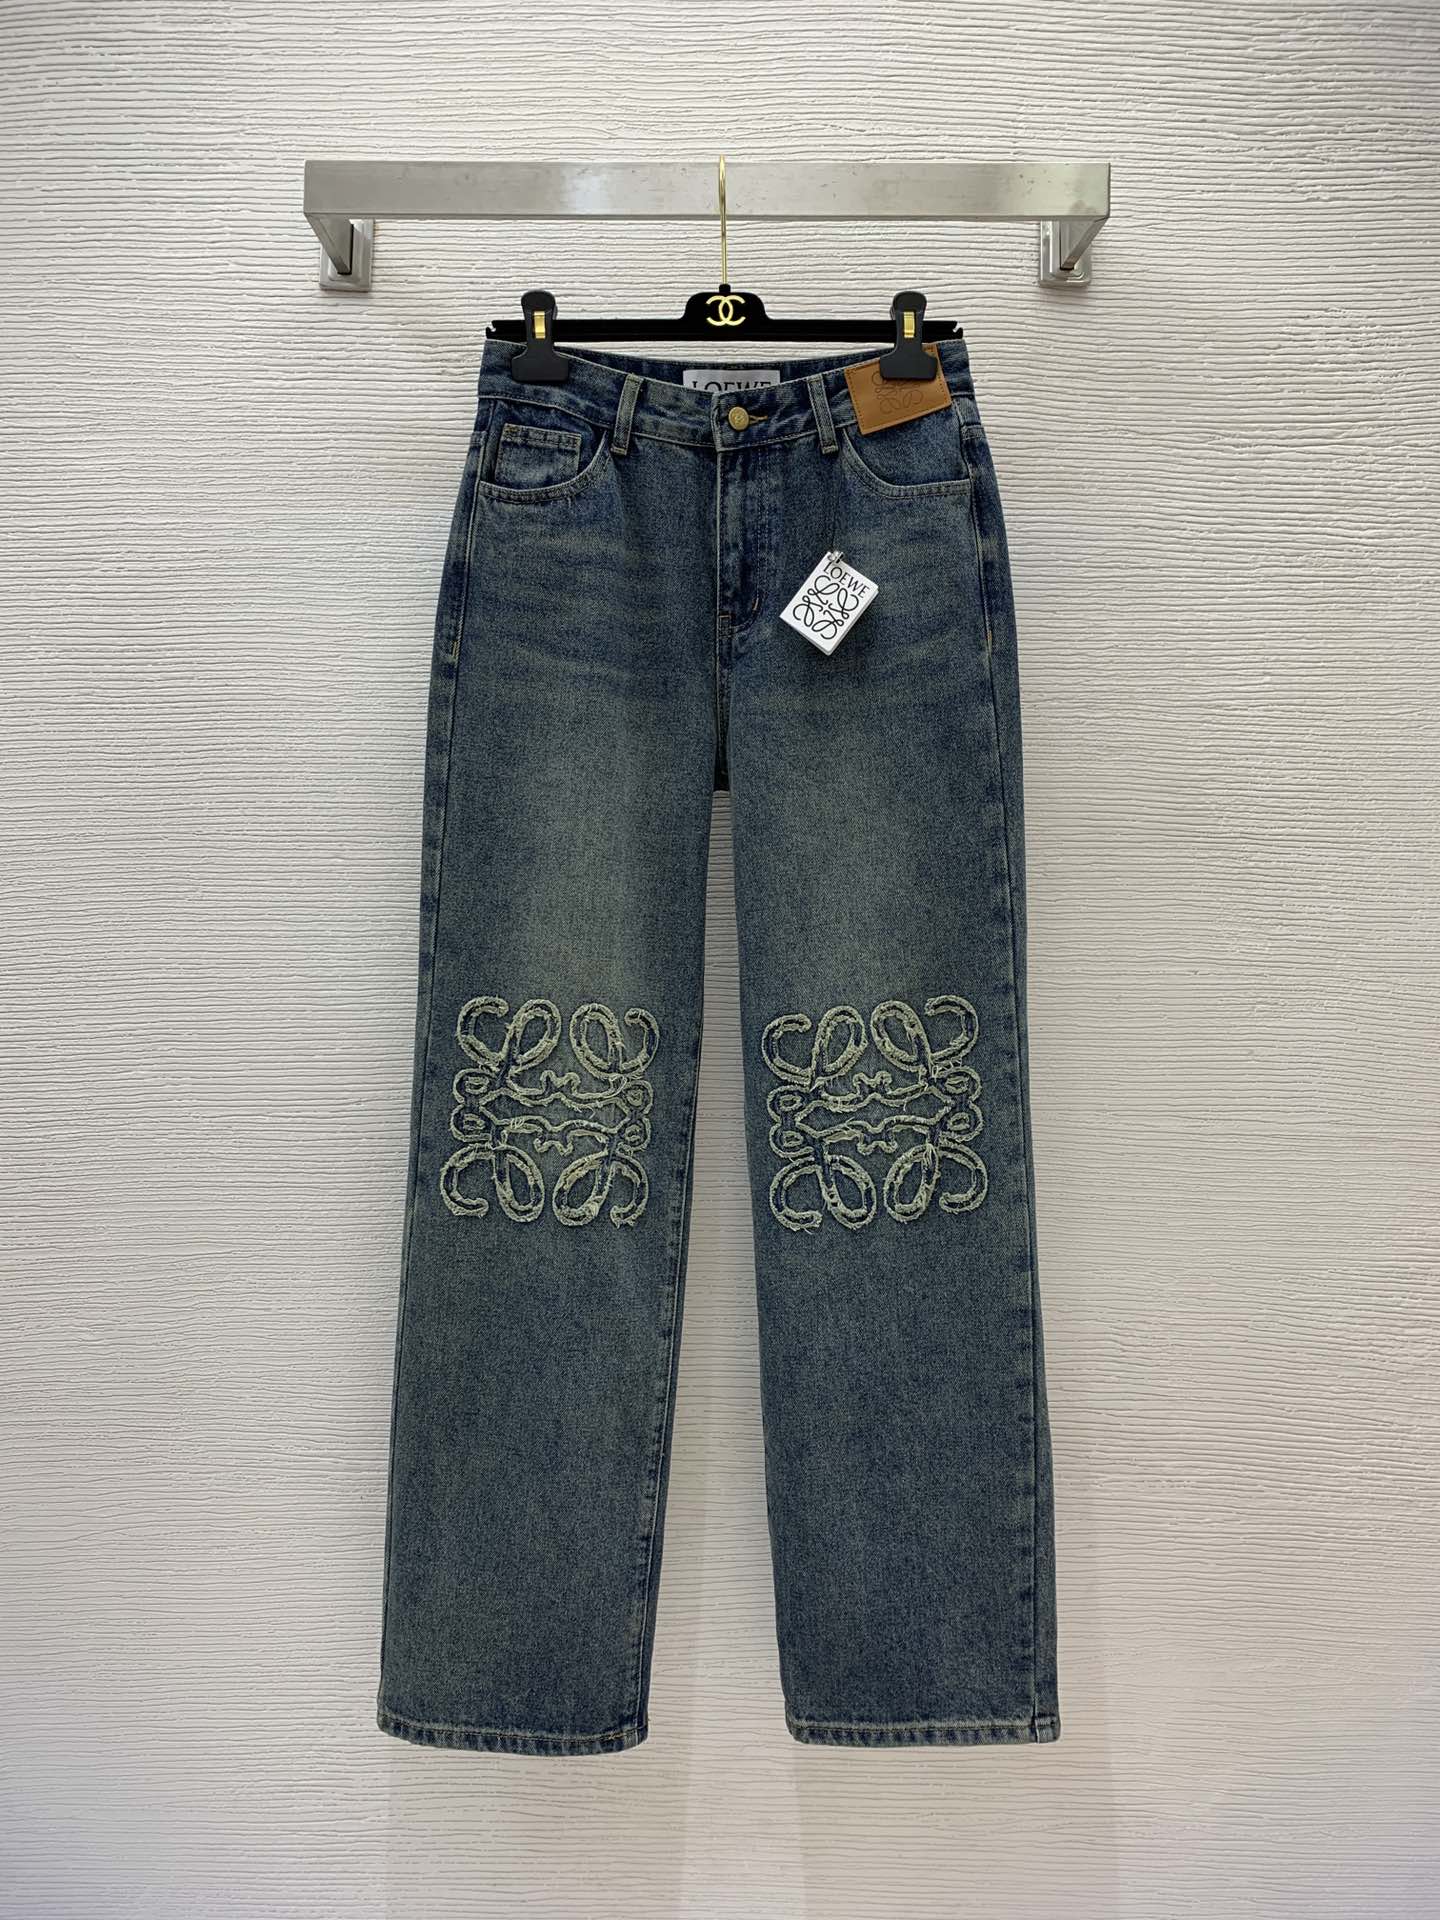 Loewe Clothing Jeans Pants & Trousers Embroidery Denim Fall/Winter Collection Wide Leg